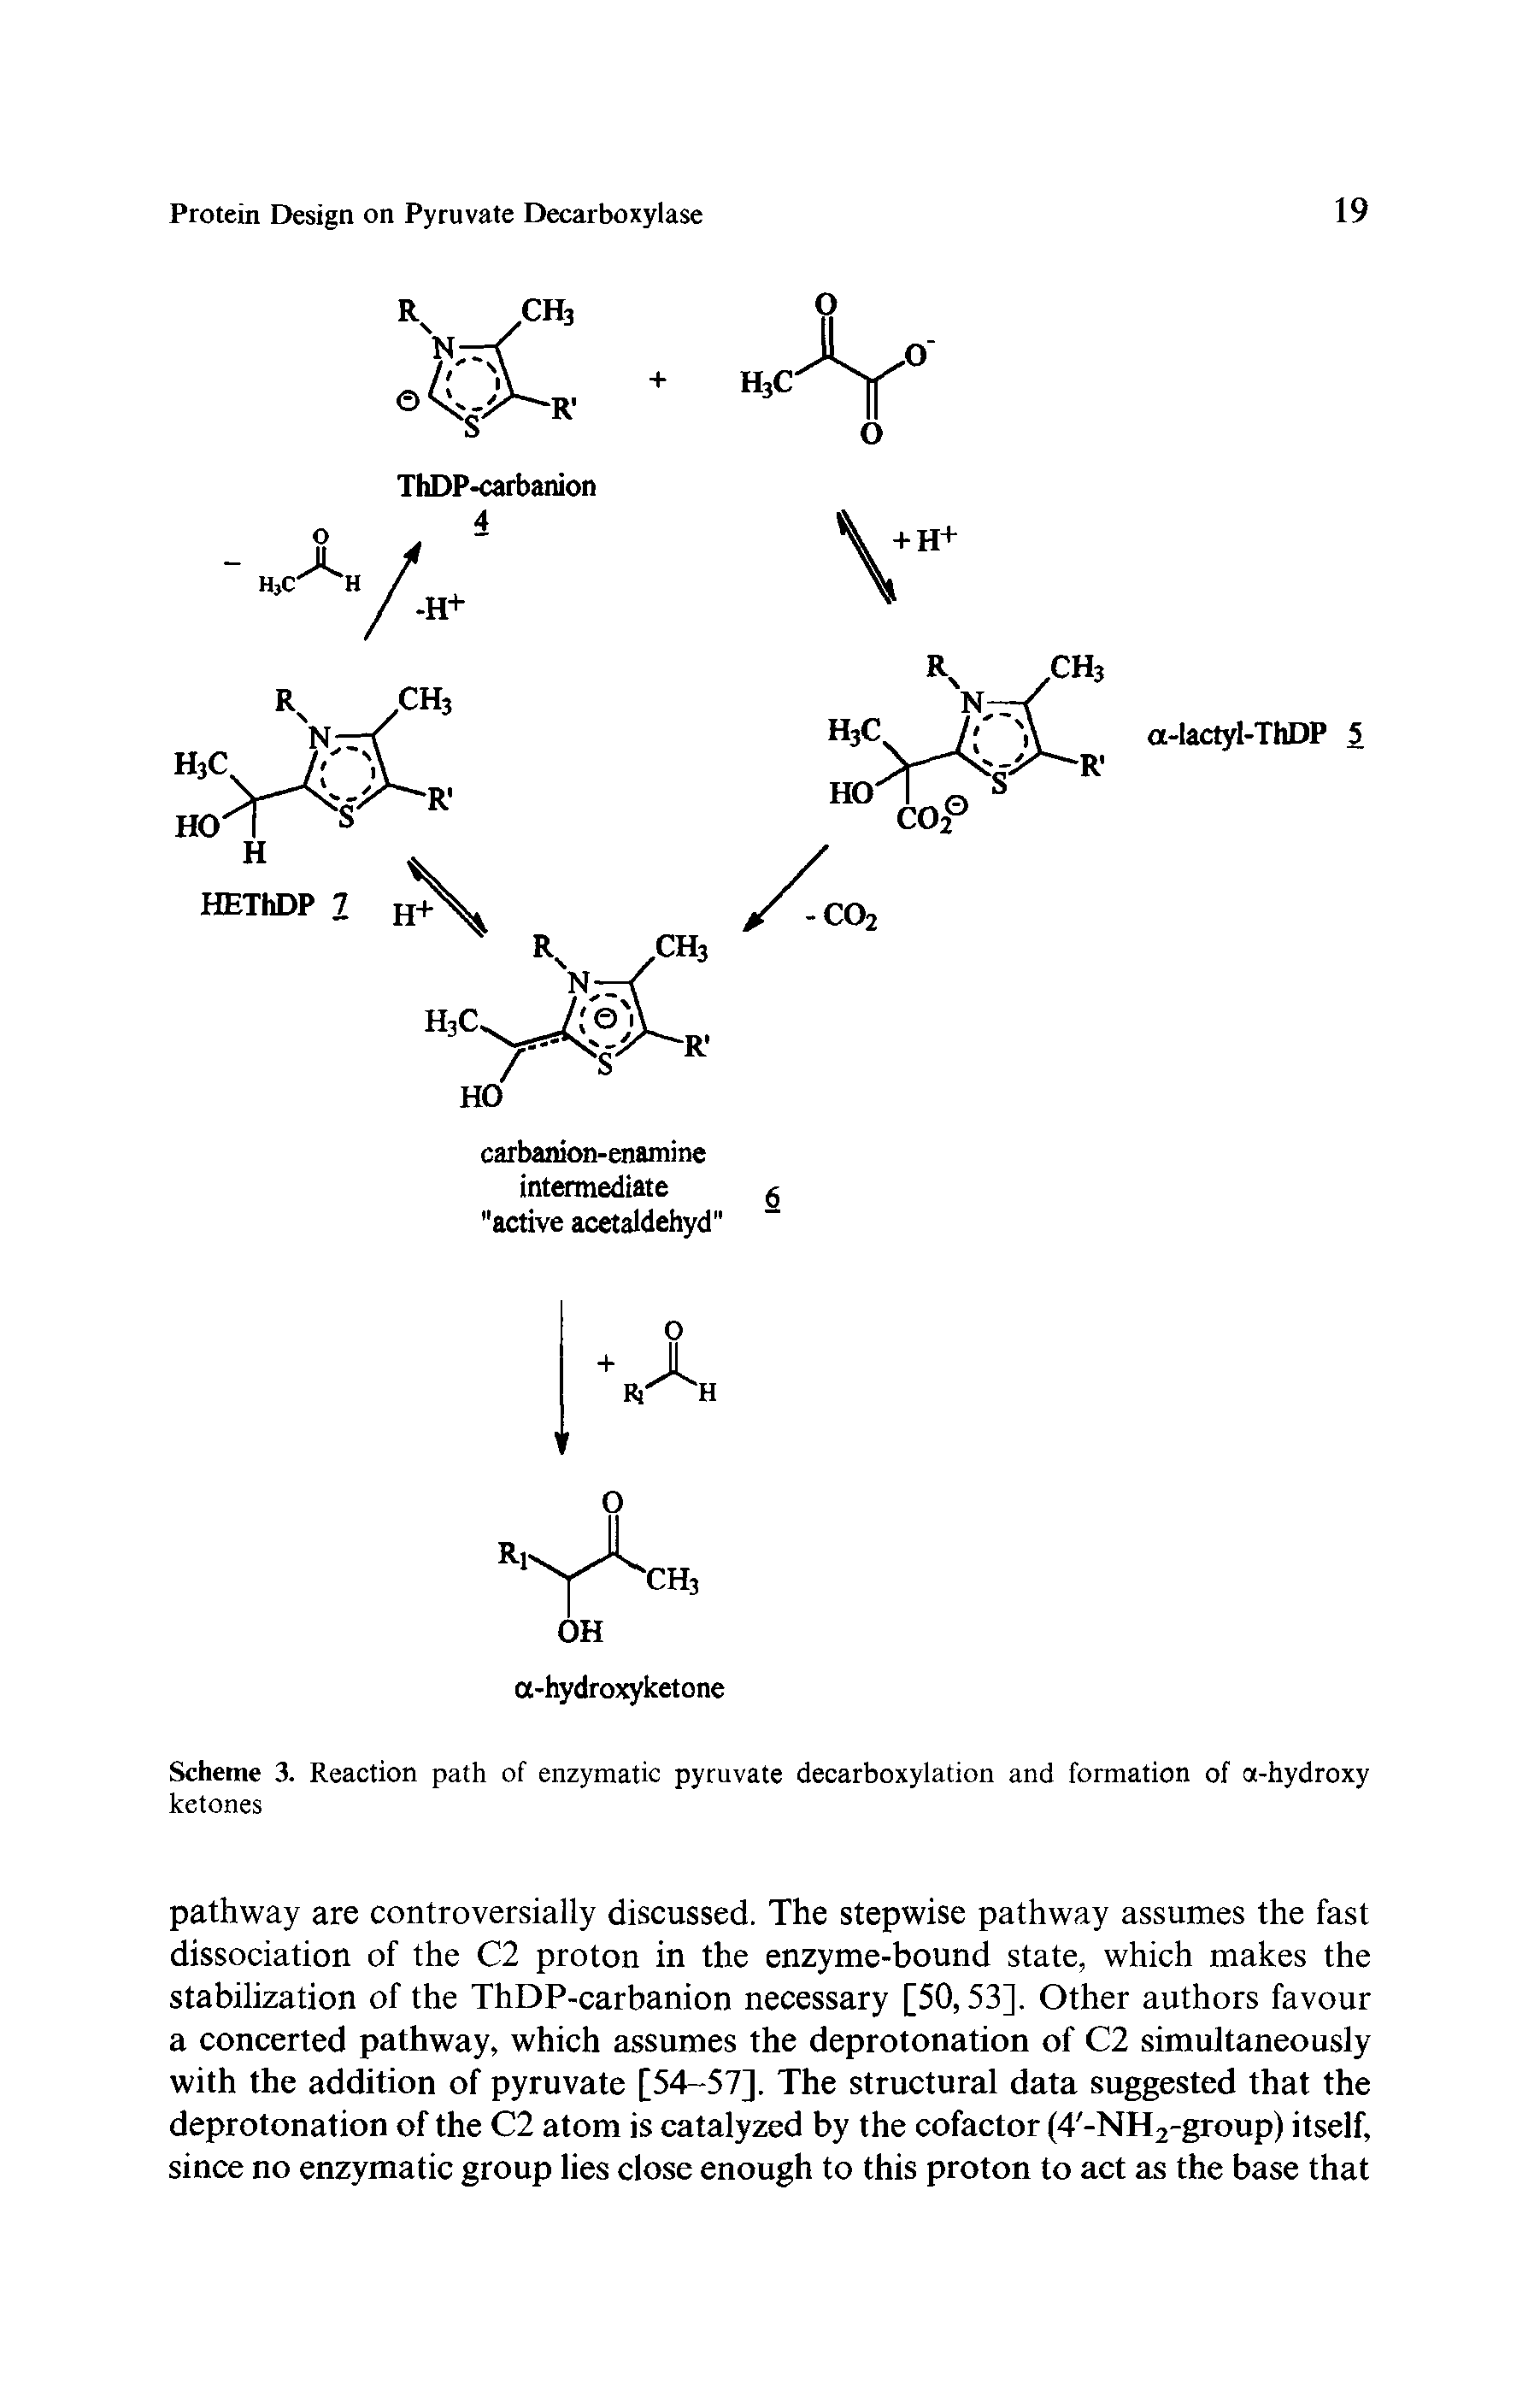 Scheme 3. Reaction path of enzymatic pyruvate decarboxylation and formation of a-hydroxy ketones...